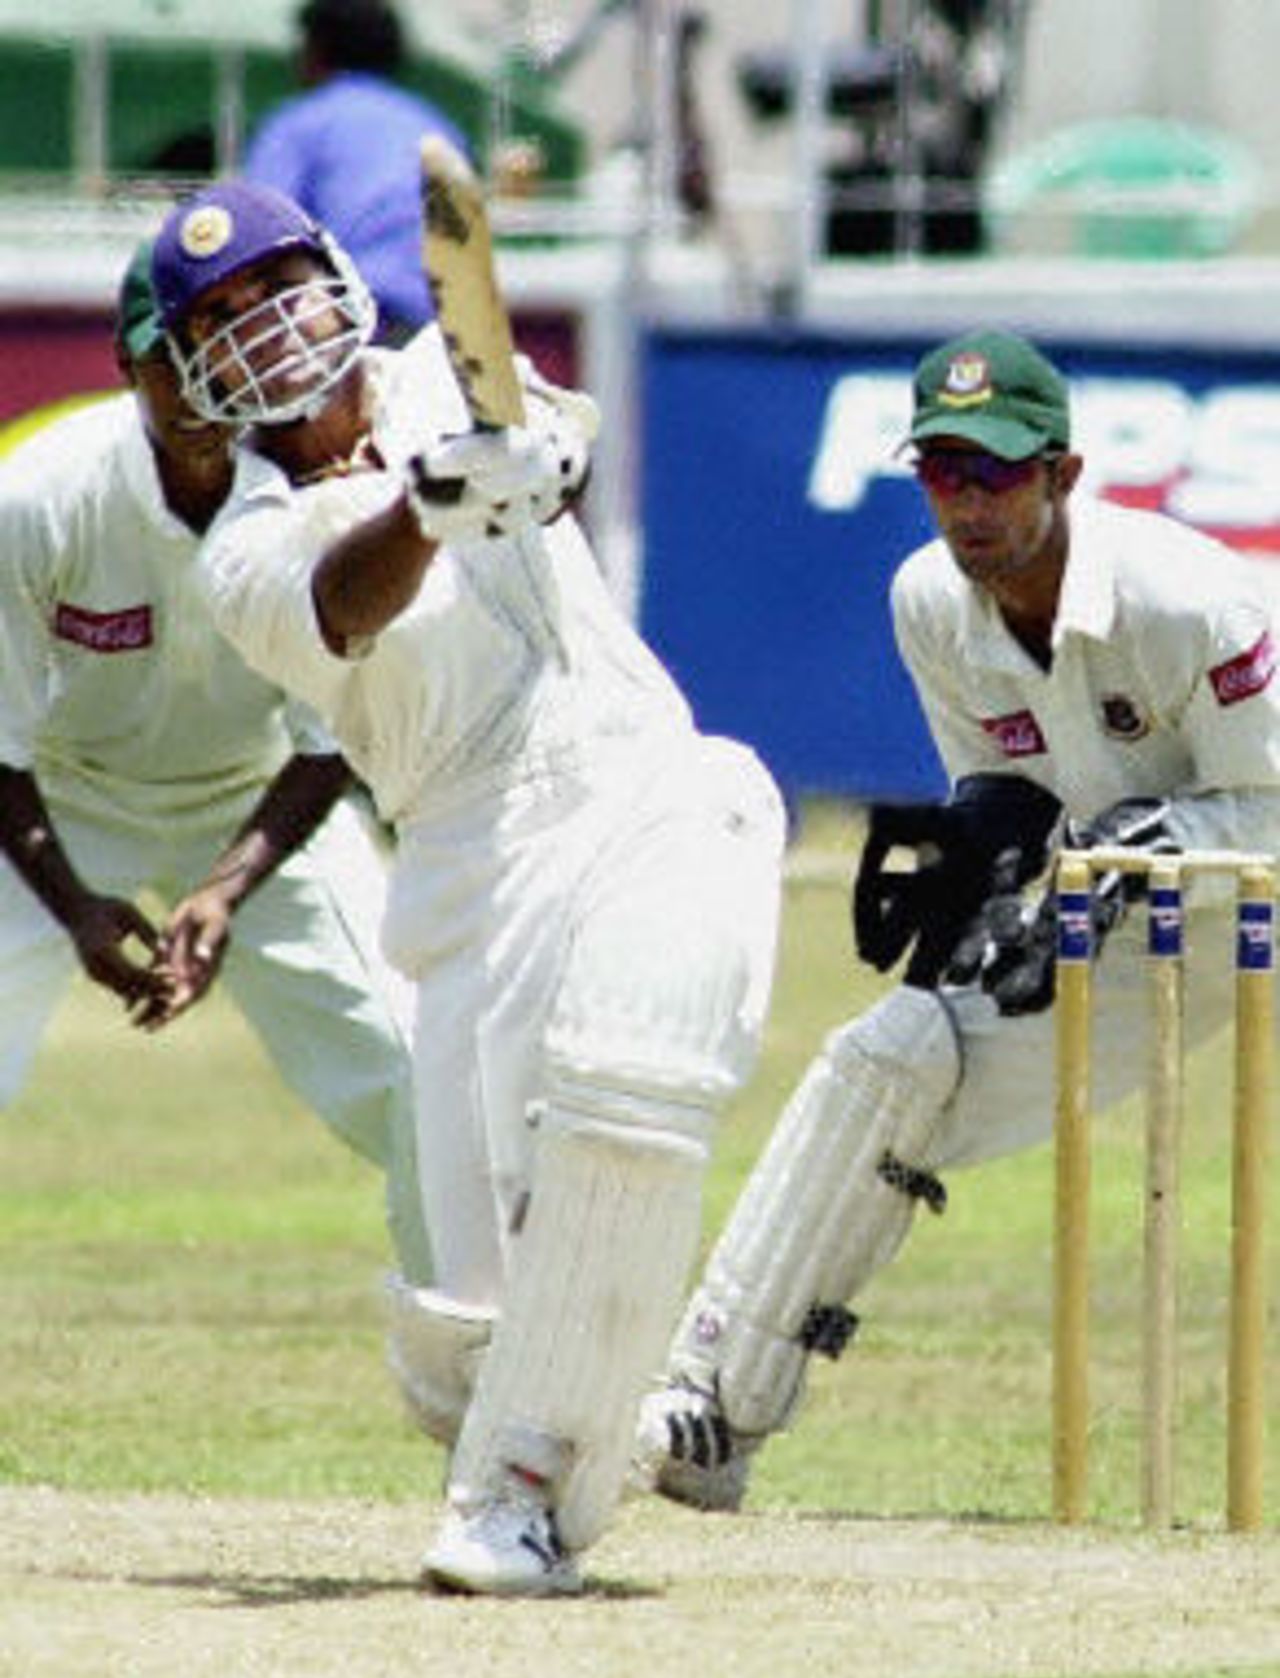 Marvan Atapattu hits a ball on his way to making 201 during the second day ,Asian Test Championship 2001-02, 2nd Match, Sri Lanka v Bangladesh, Sinhalese Sports Club Ground, Colombo.